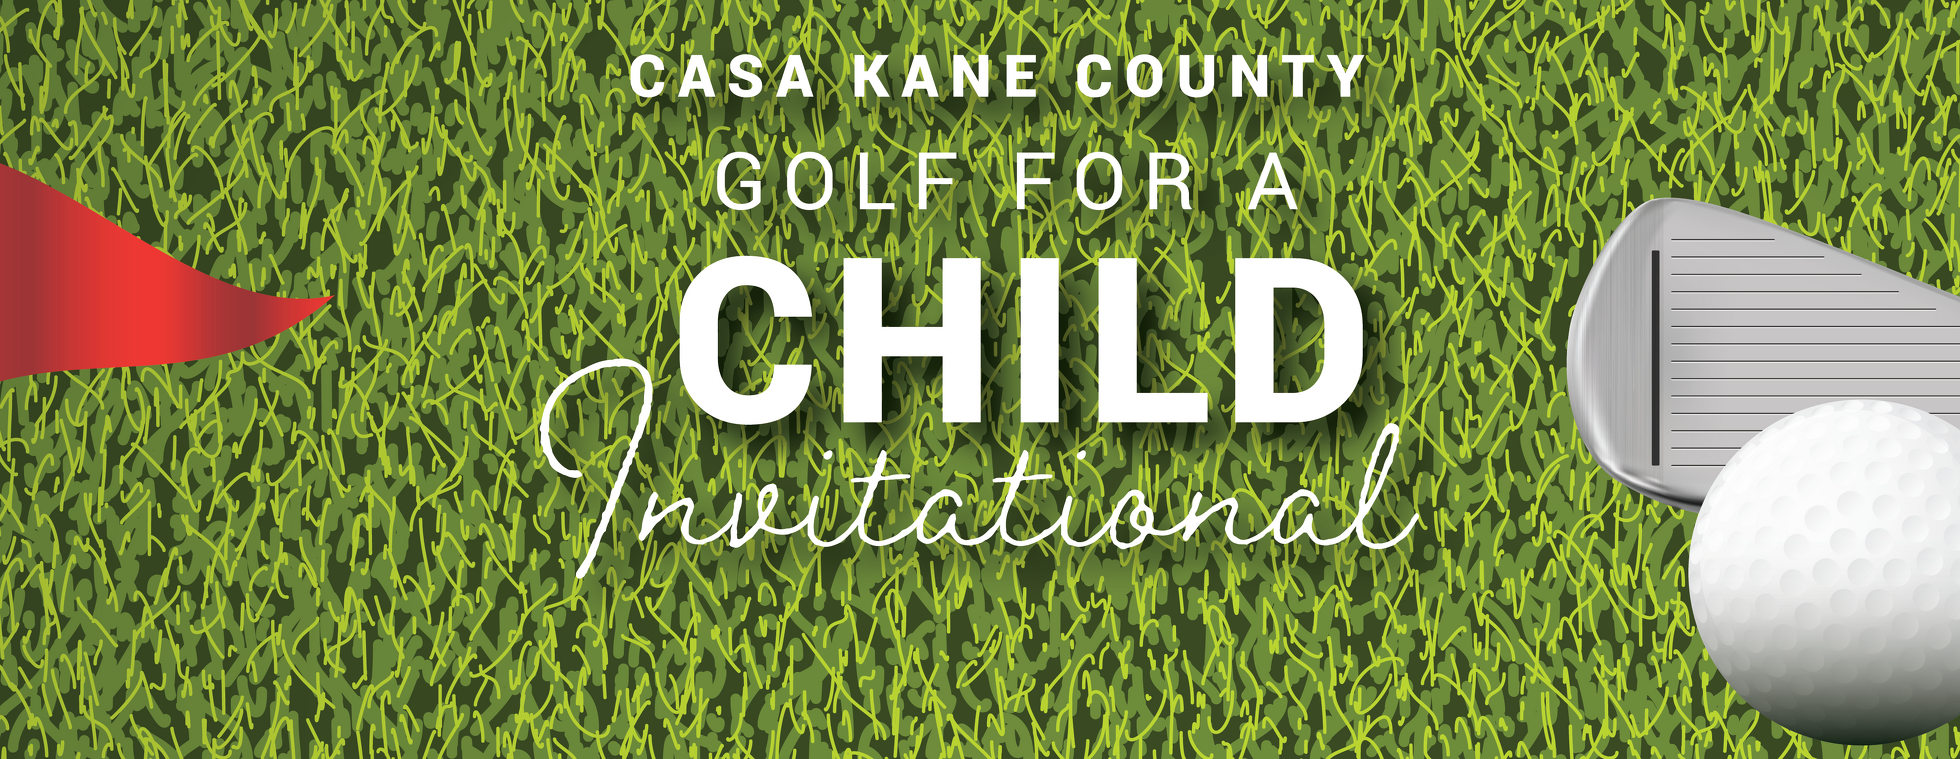 Casa Kane County's Golf for a Child 